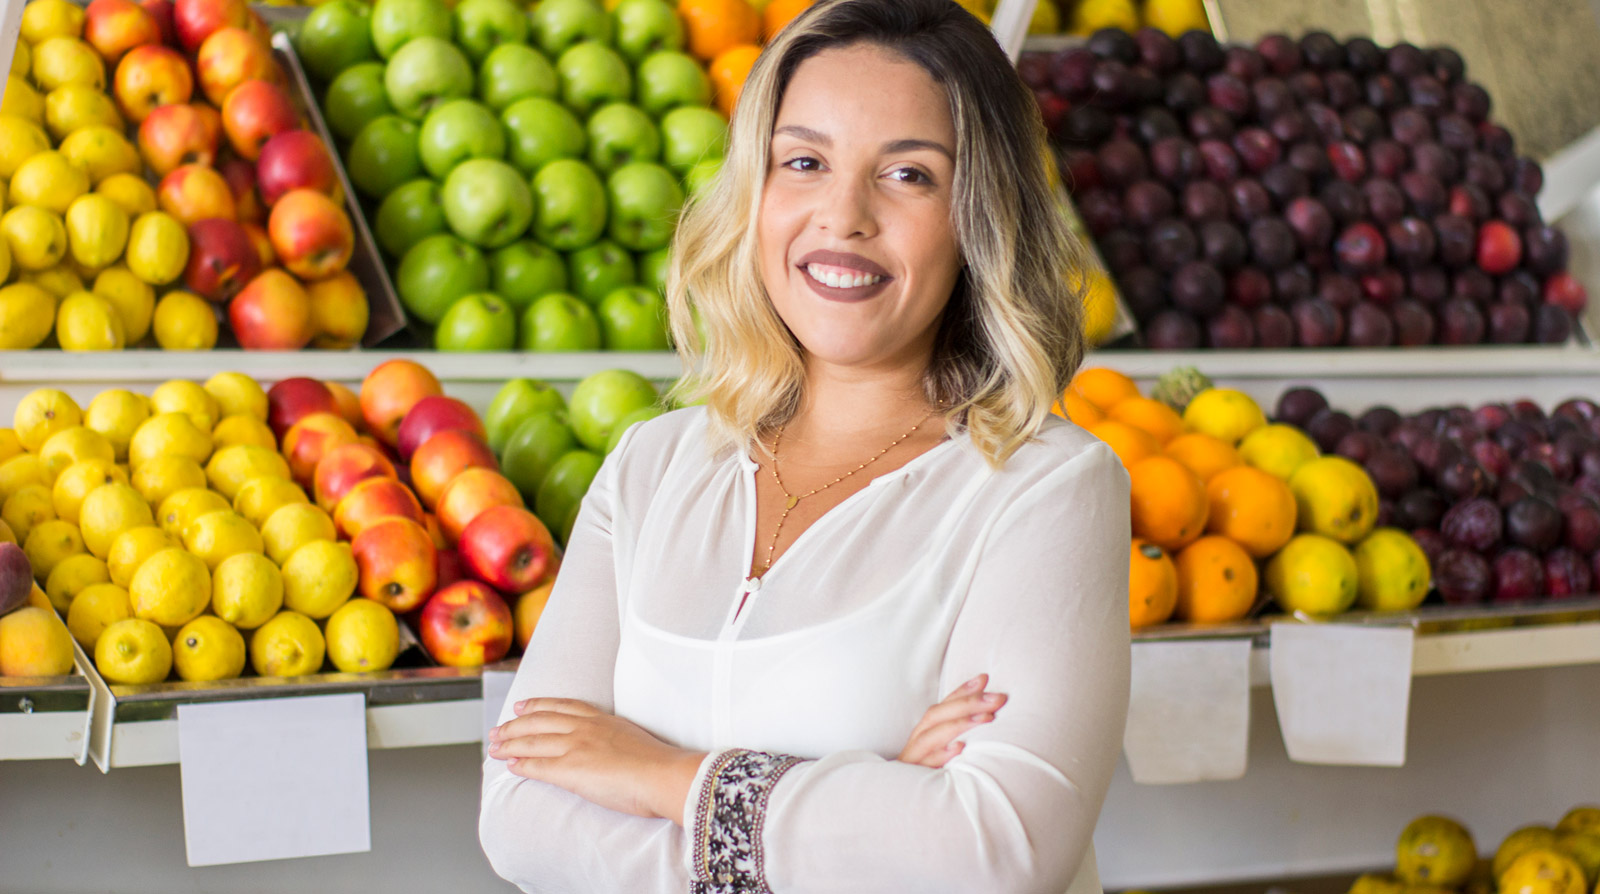 A woman standing in front of fresh fruits and vegetables in a grocery store.